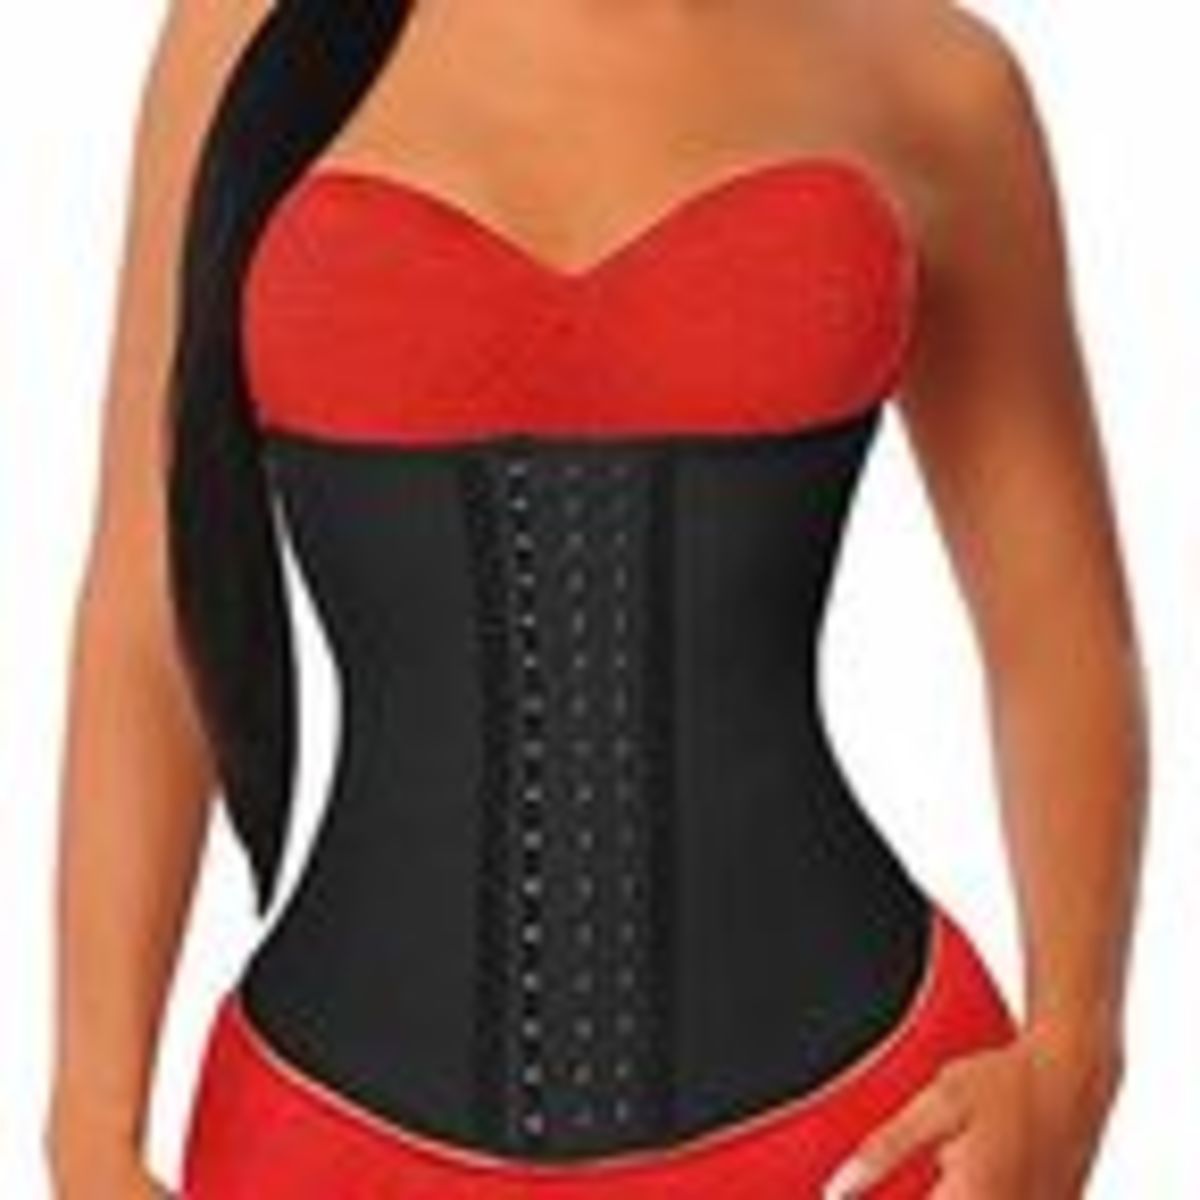 The Waist Trainer Trend: The Quest for 